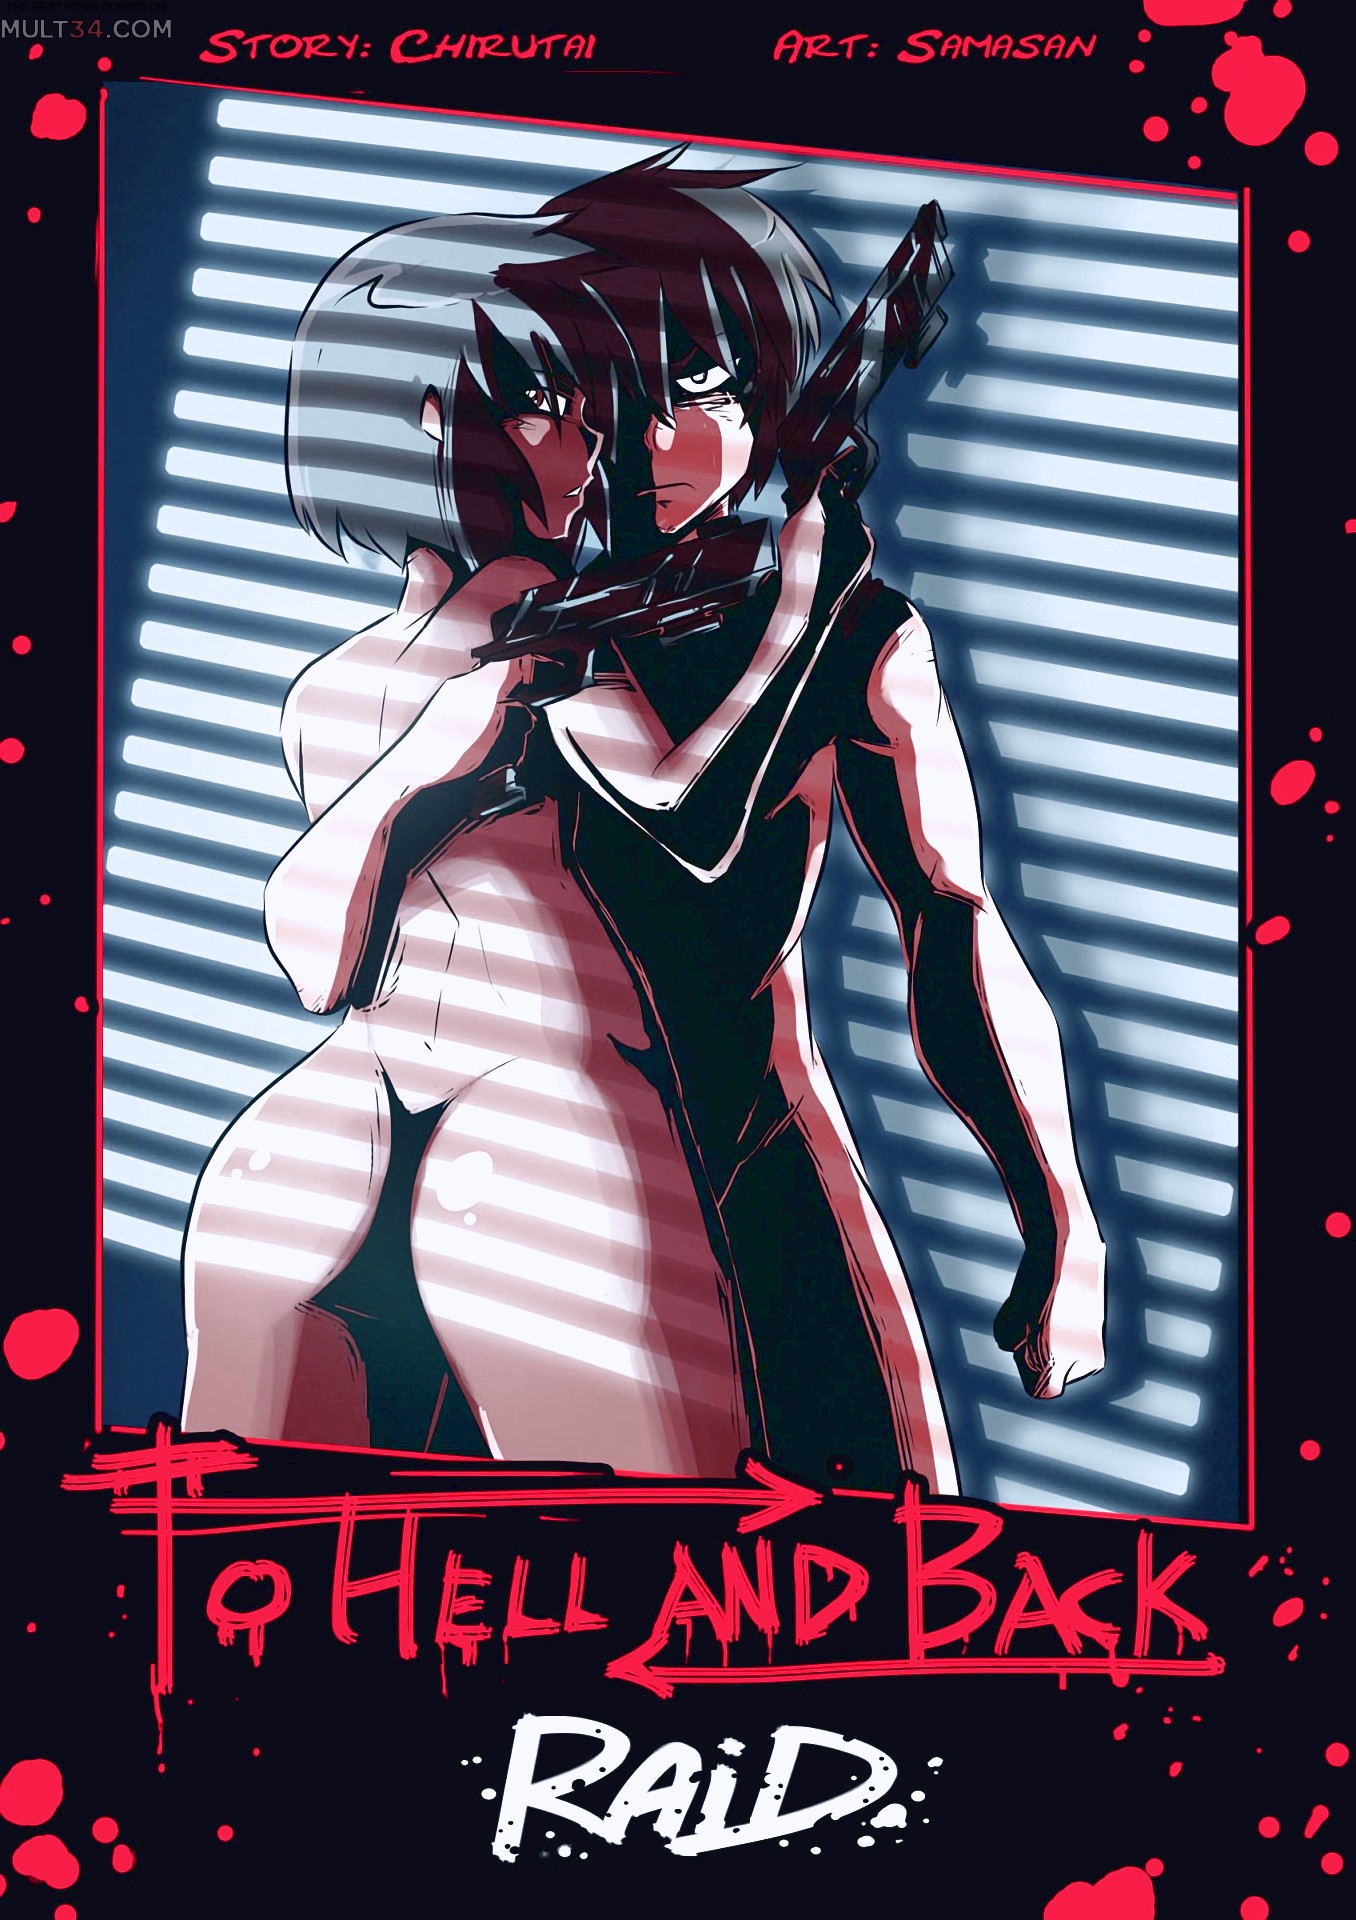 Back Toon Porn - To Hell and Back: RAID porn comic - the best cartoon porn comics, Rule 34 |  MULT34